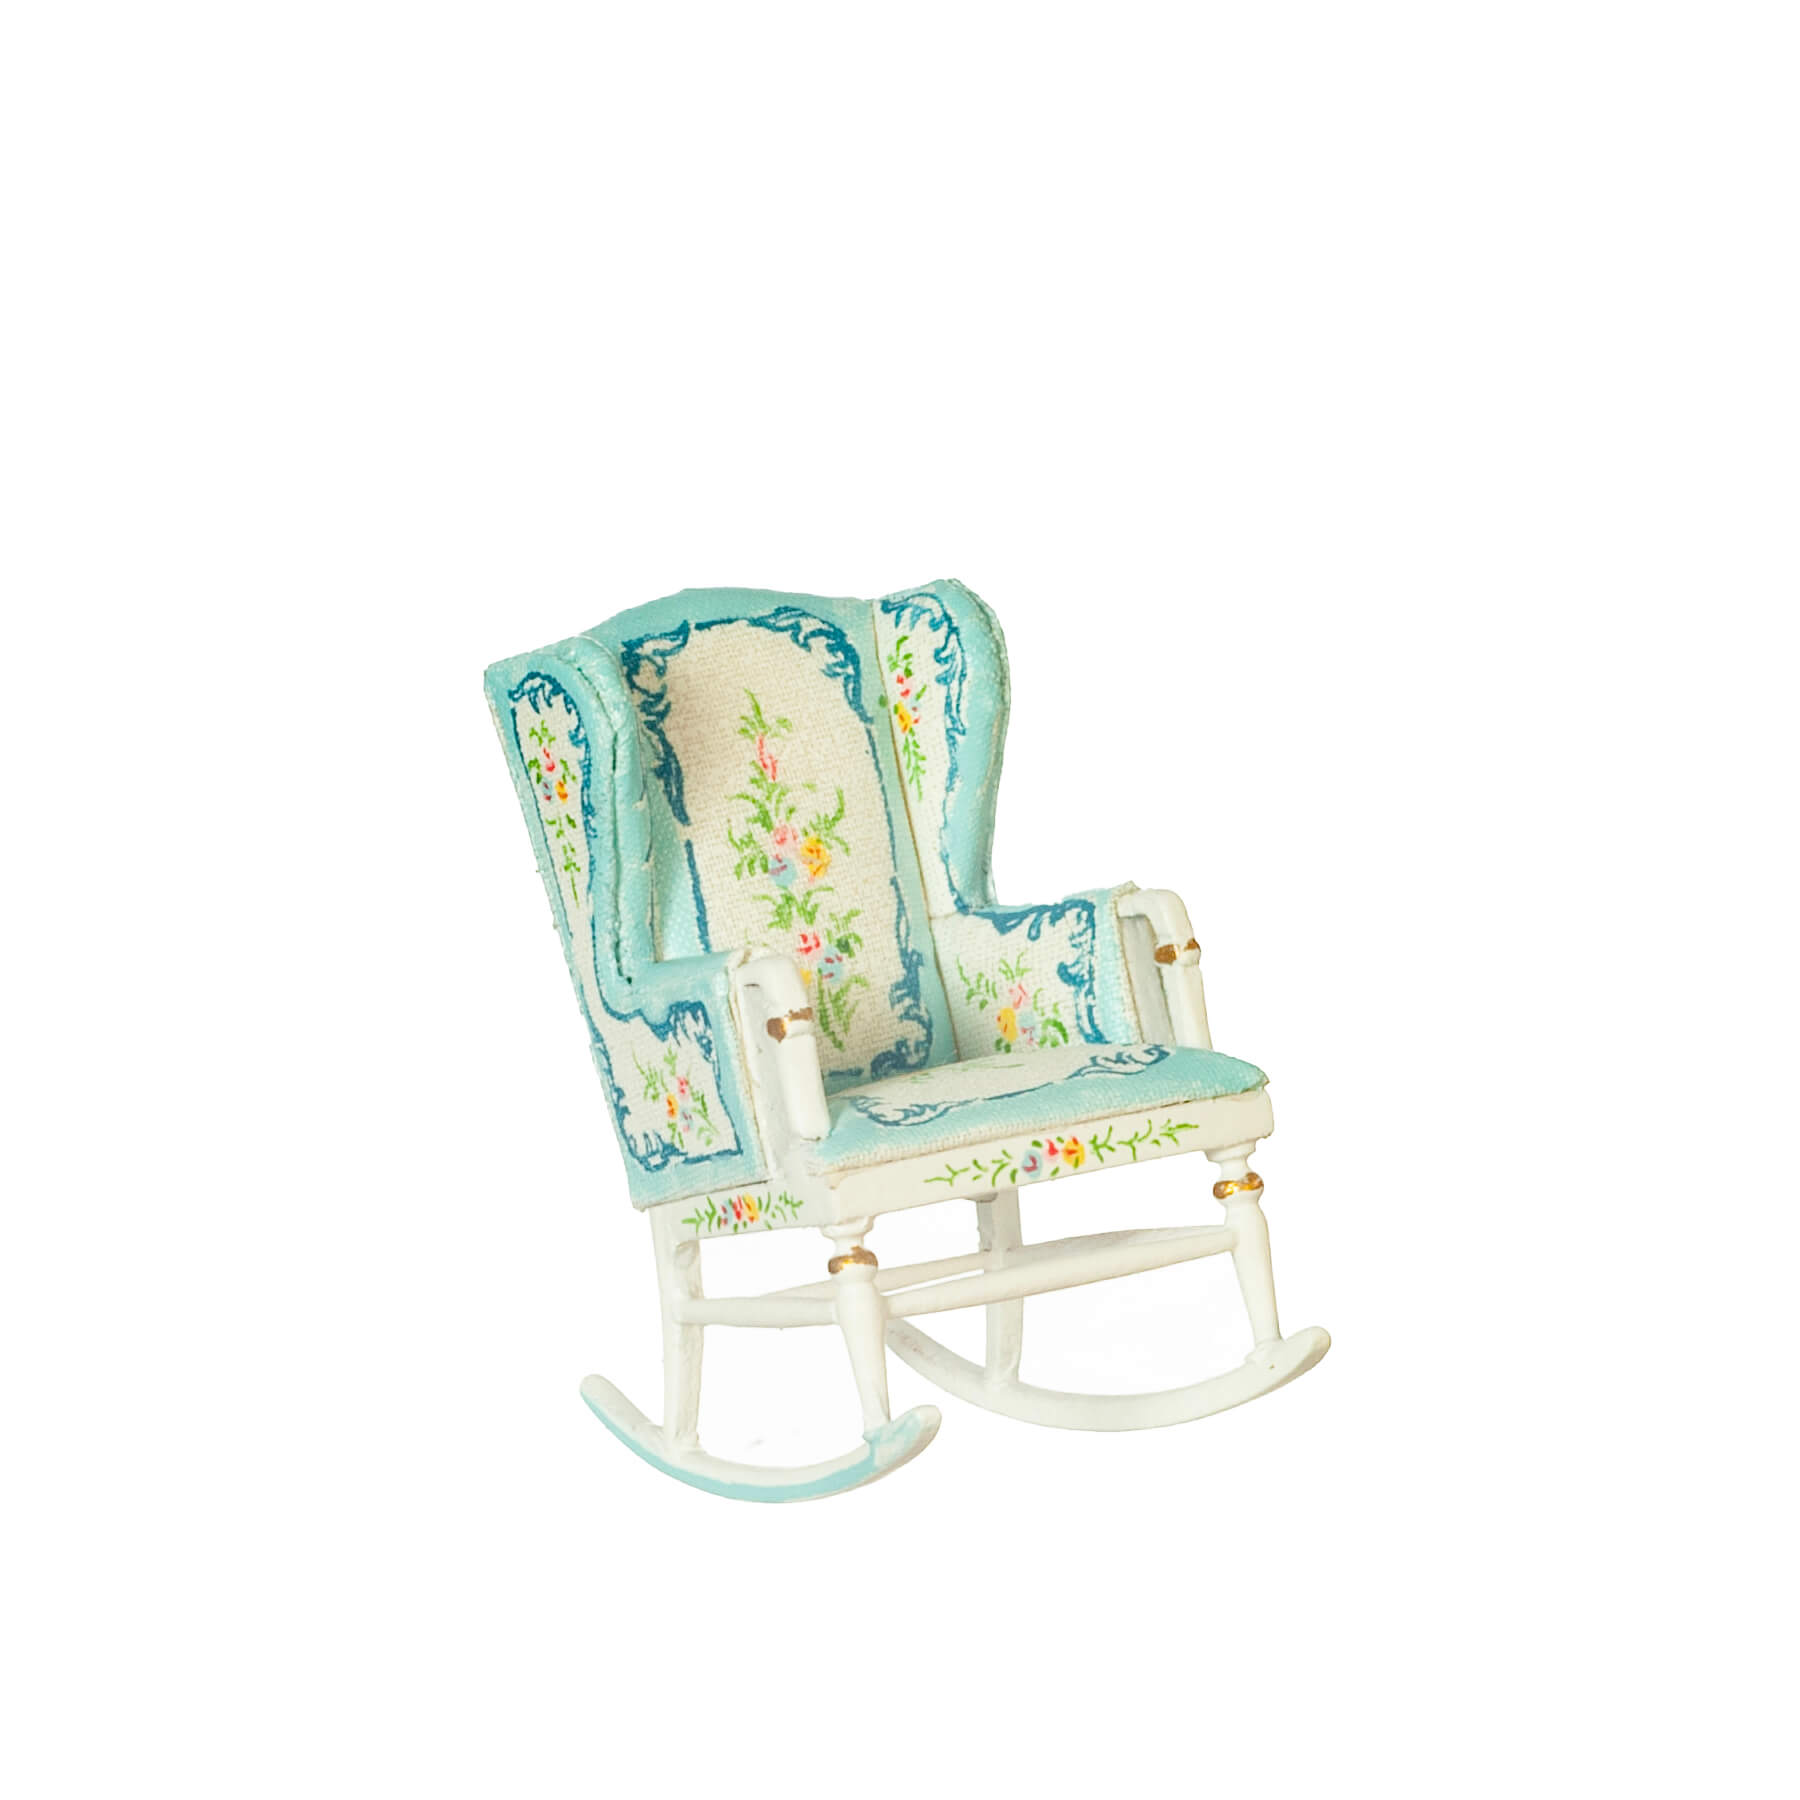 1/2in Scale Upholstered Rocking Chair - White